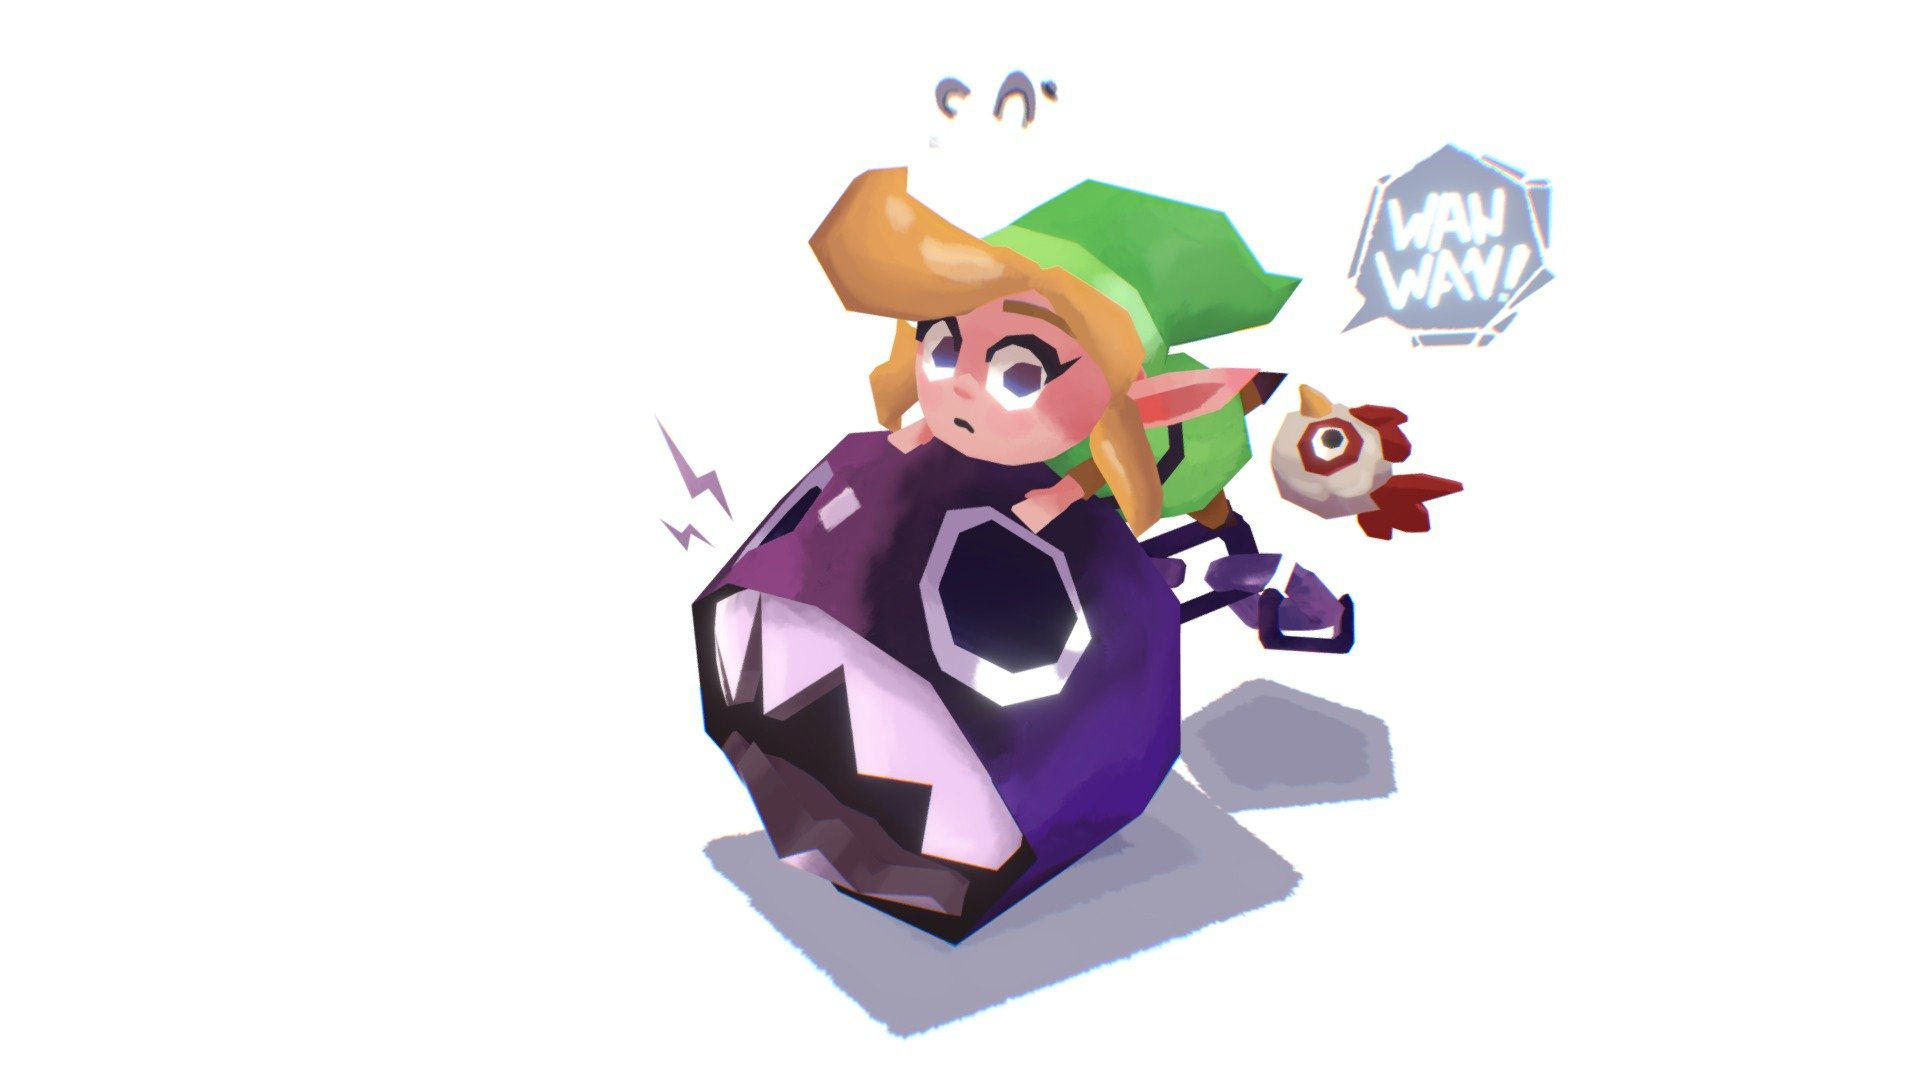 A tribute to Links Awakening! Modeled in Maya and painted in Substance Painter.
Concept by the lovely🌻Rianti (ANHIRA) 🌻@kiha_ki https://twitter.com/kiha_ki/status/1097270953040441344
 - Link Awakens - 3D model by CourtneyFayM (@CourtneyFairytaleArt) 3d model